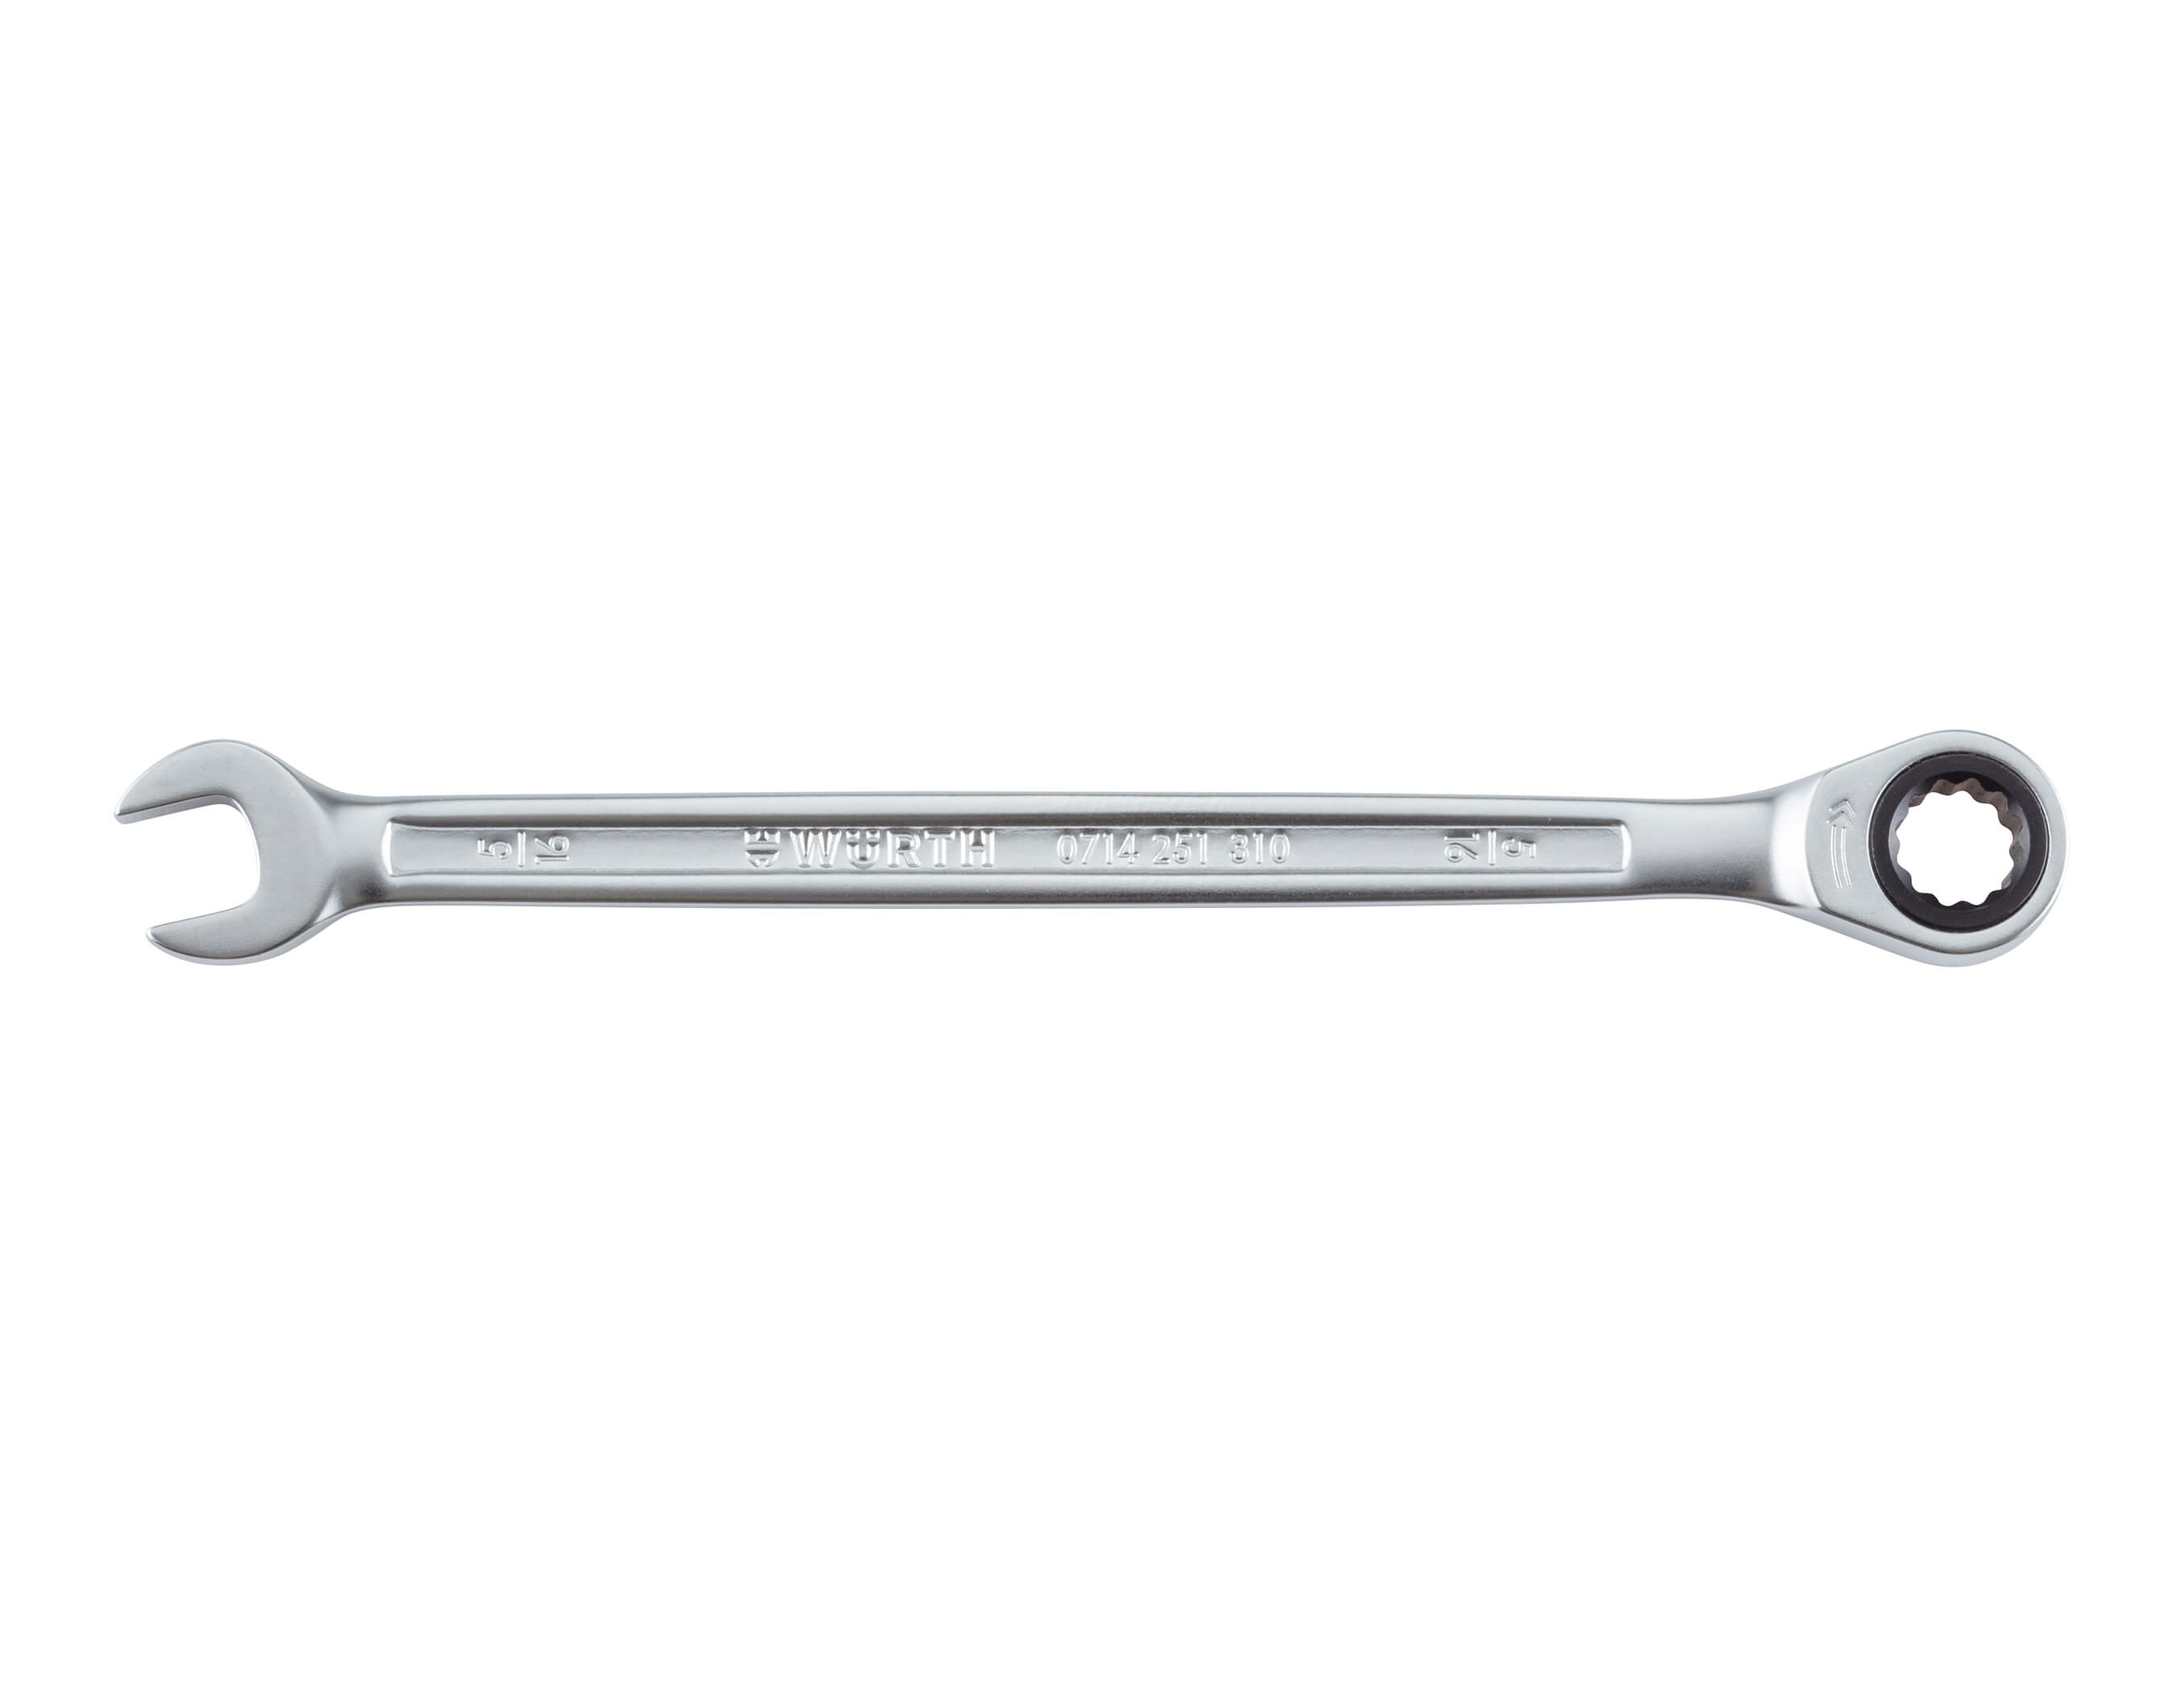 Ratcheting Combination Wrench 1 1/4 "